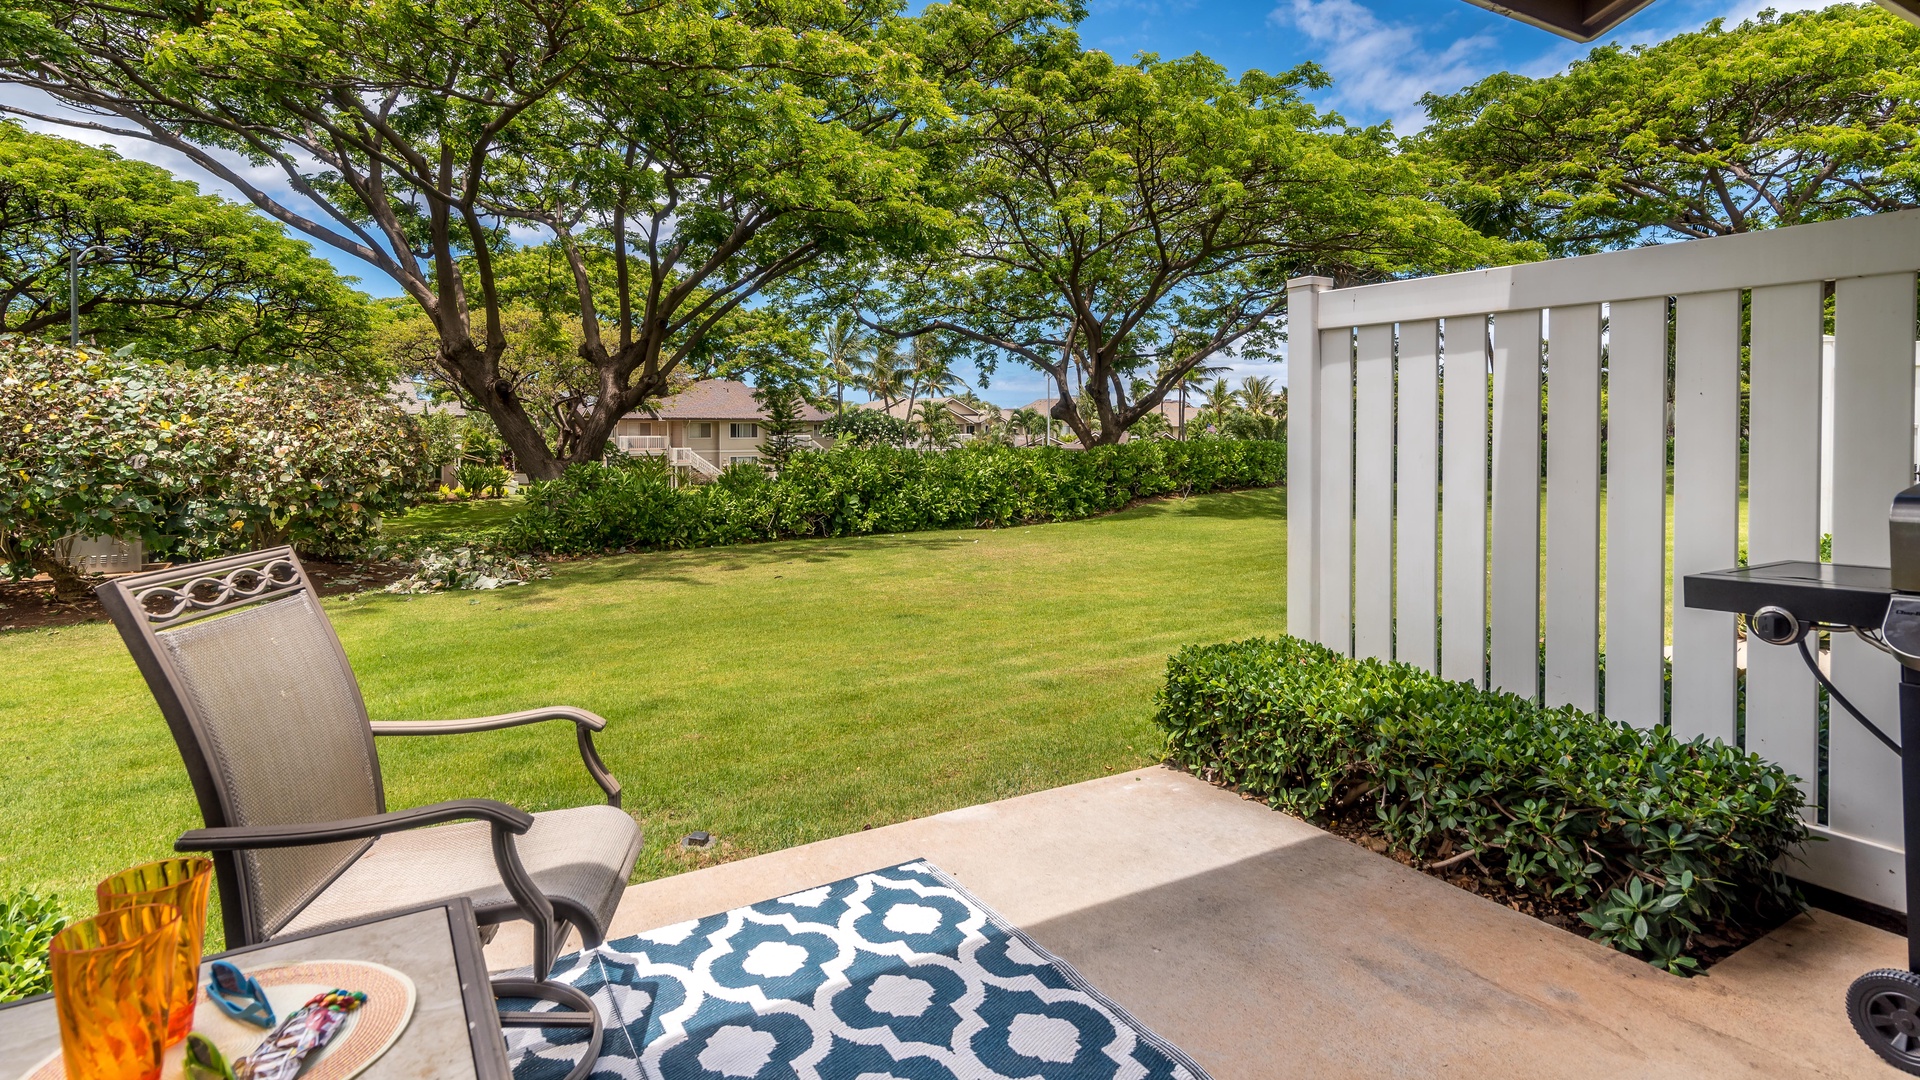 Kapolei Vacation Rentals, Hillside Villas 1538-2 - Another view from the private lanai.